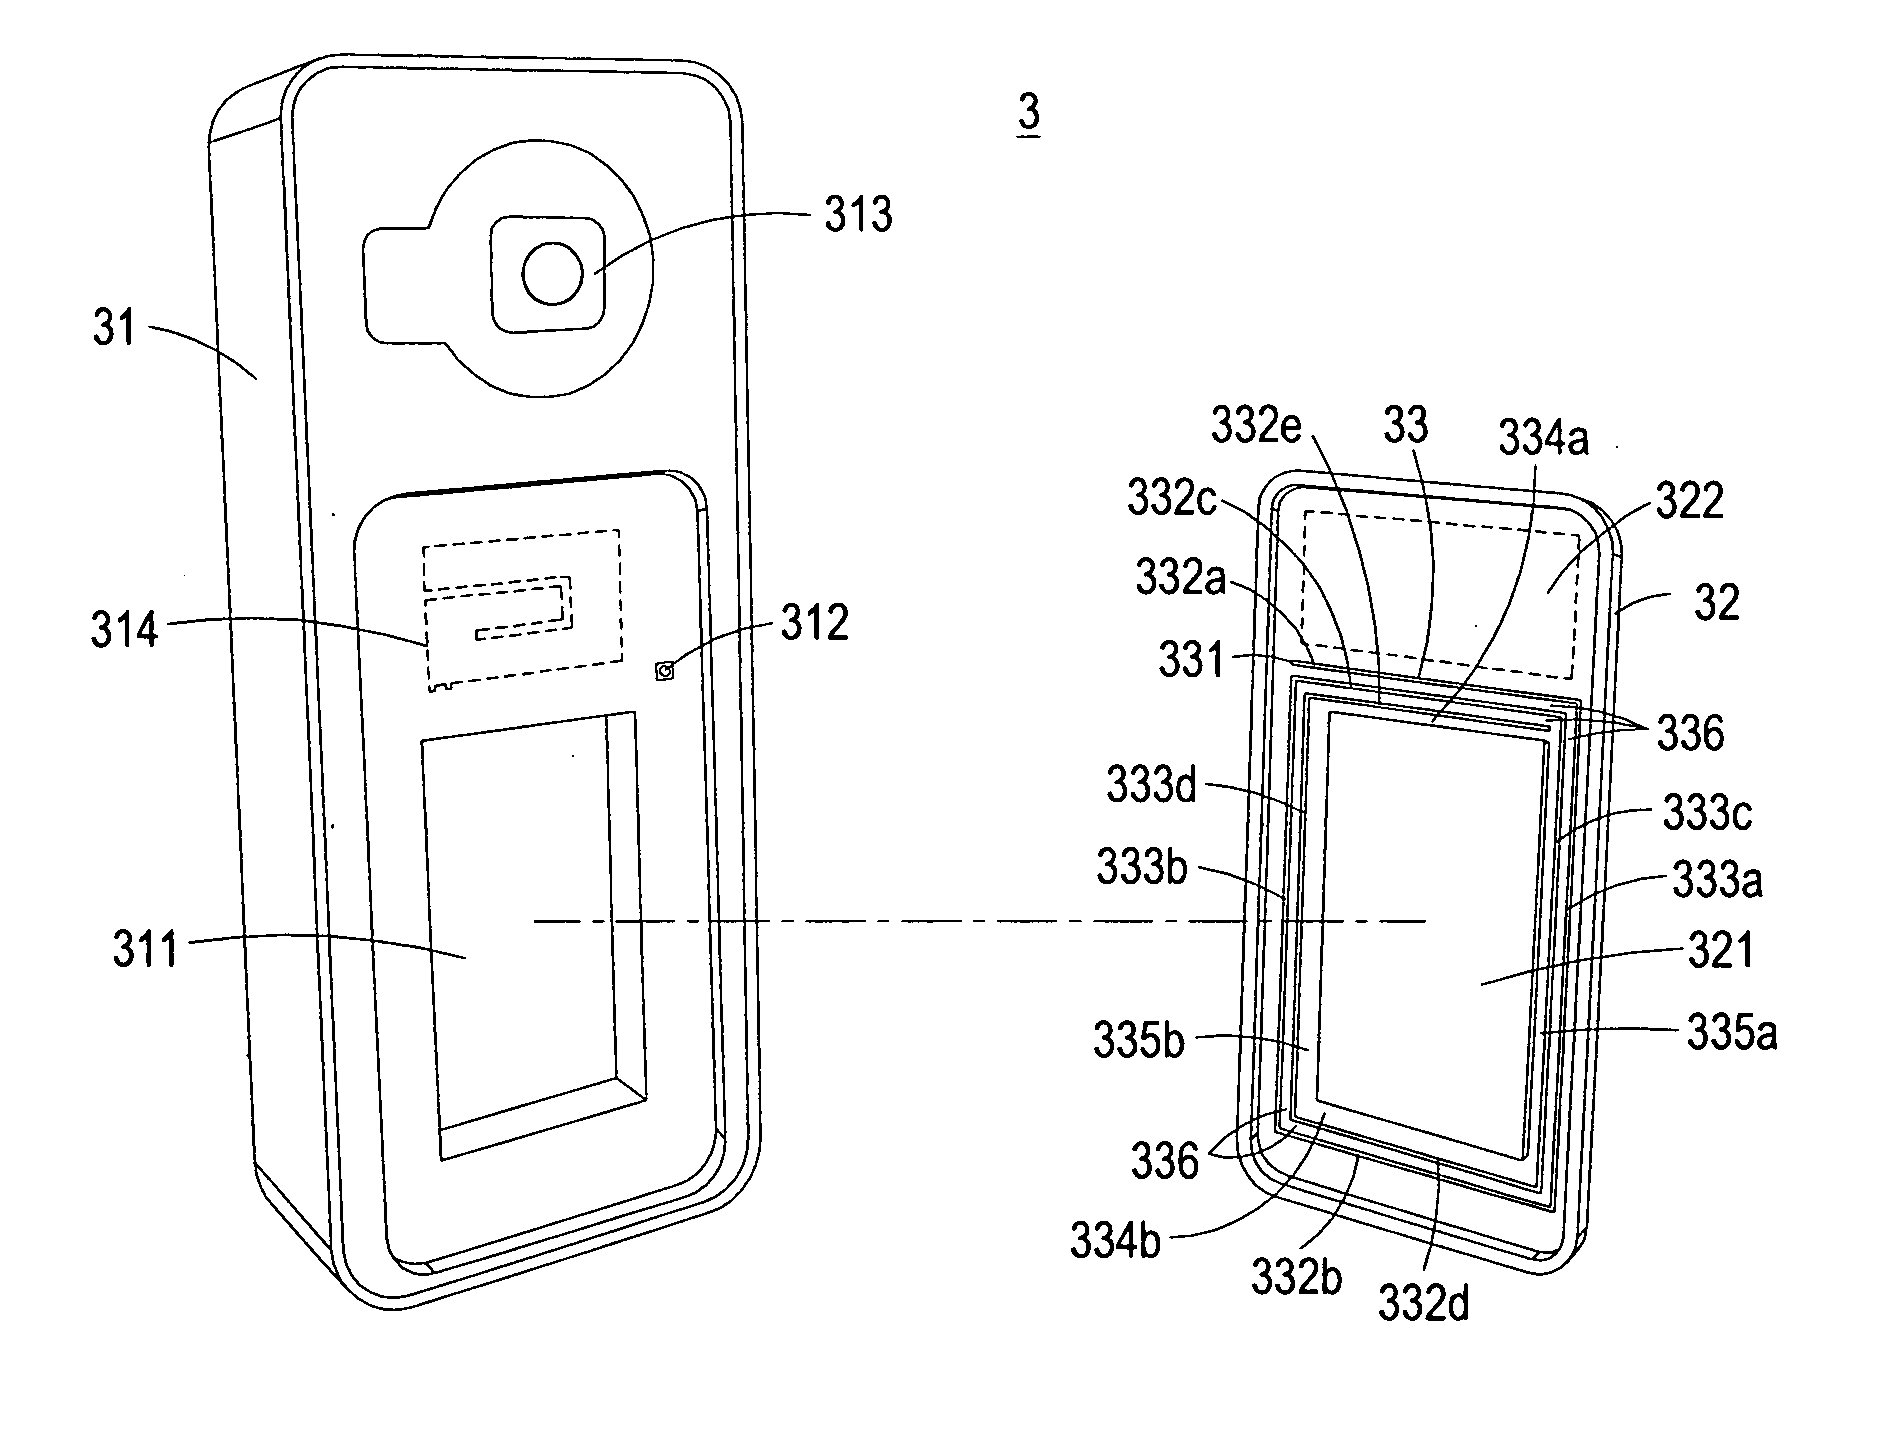 Portable electronic device with broadcast antenna